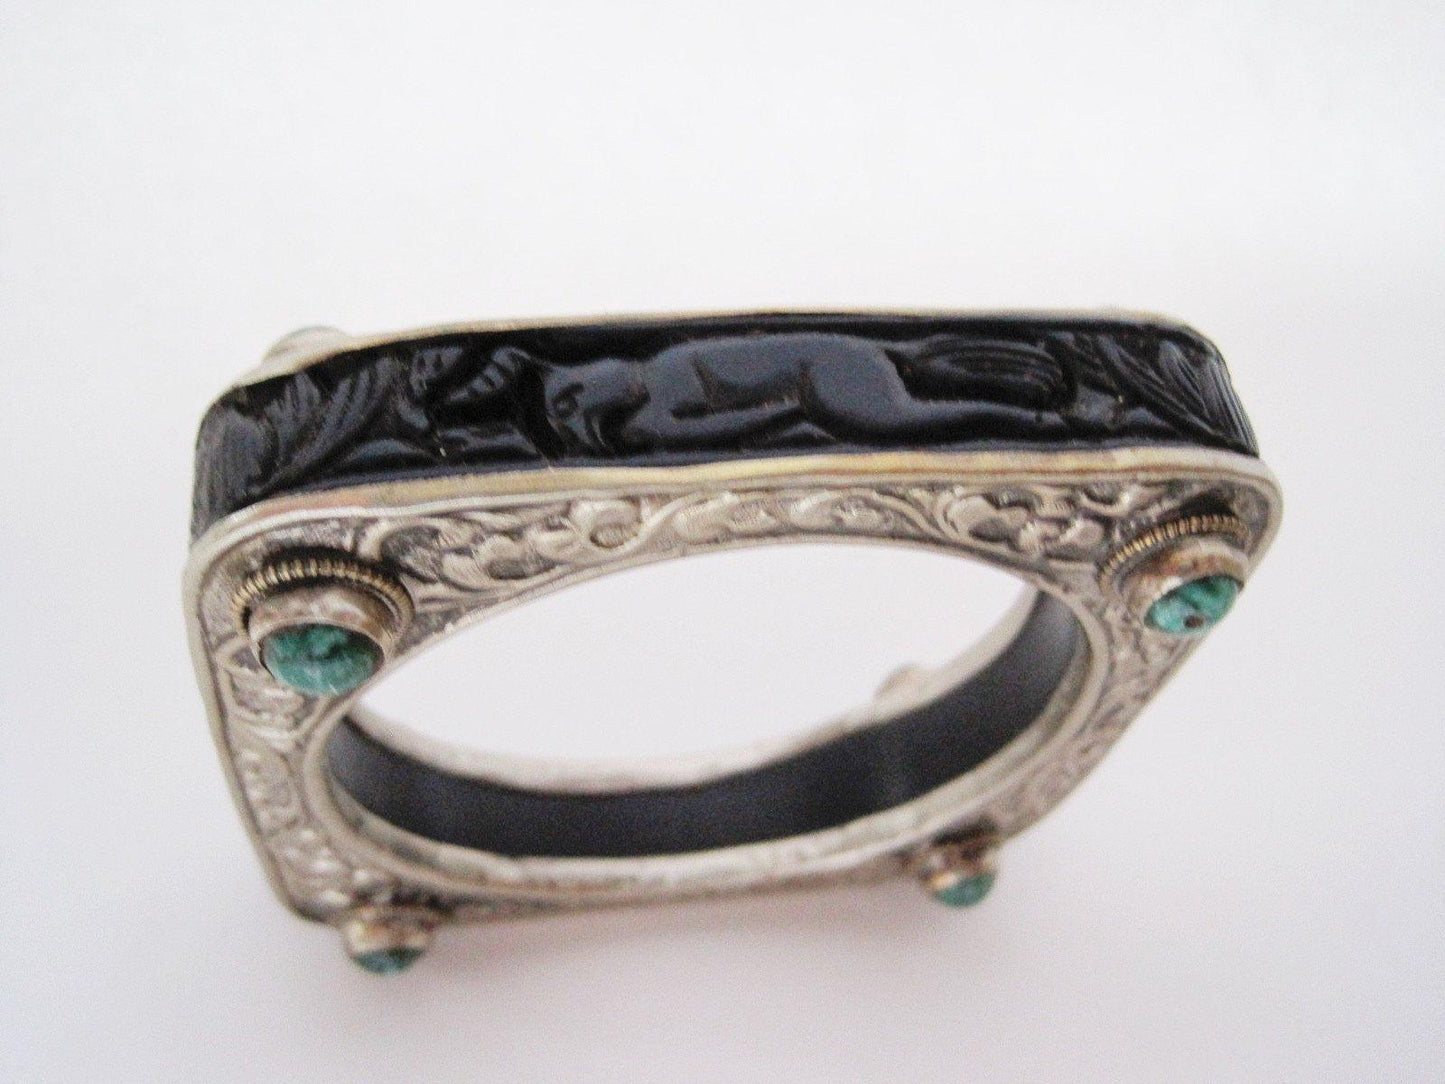 Vintage Square Carved Animal Purple Resin Bracelet from Nepal or Tibet with Silver Metal Overlay - Anteeka